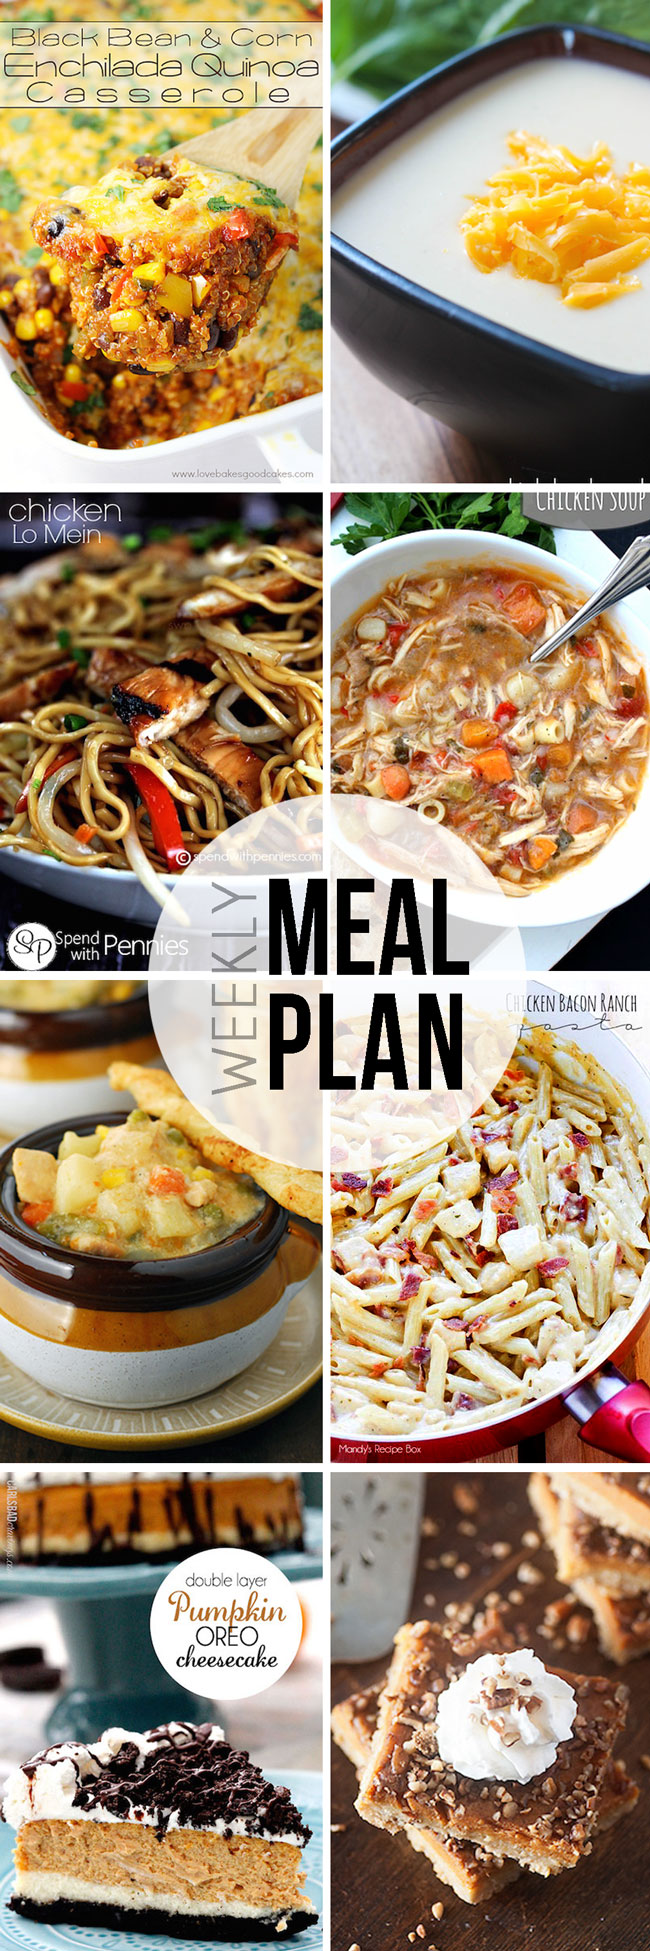 Easy Meal Plan Sunday #14.